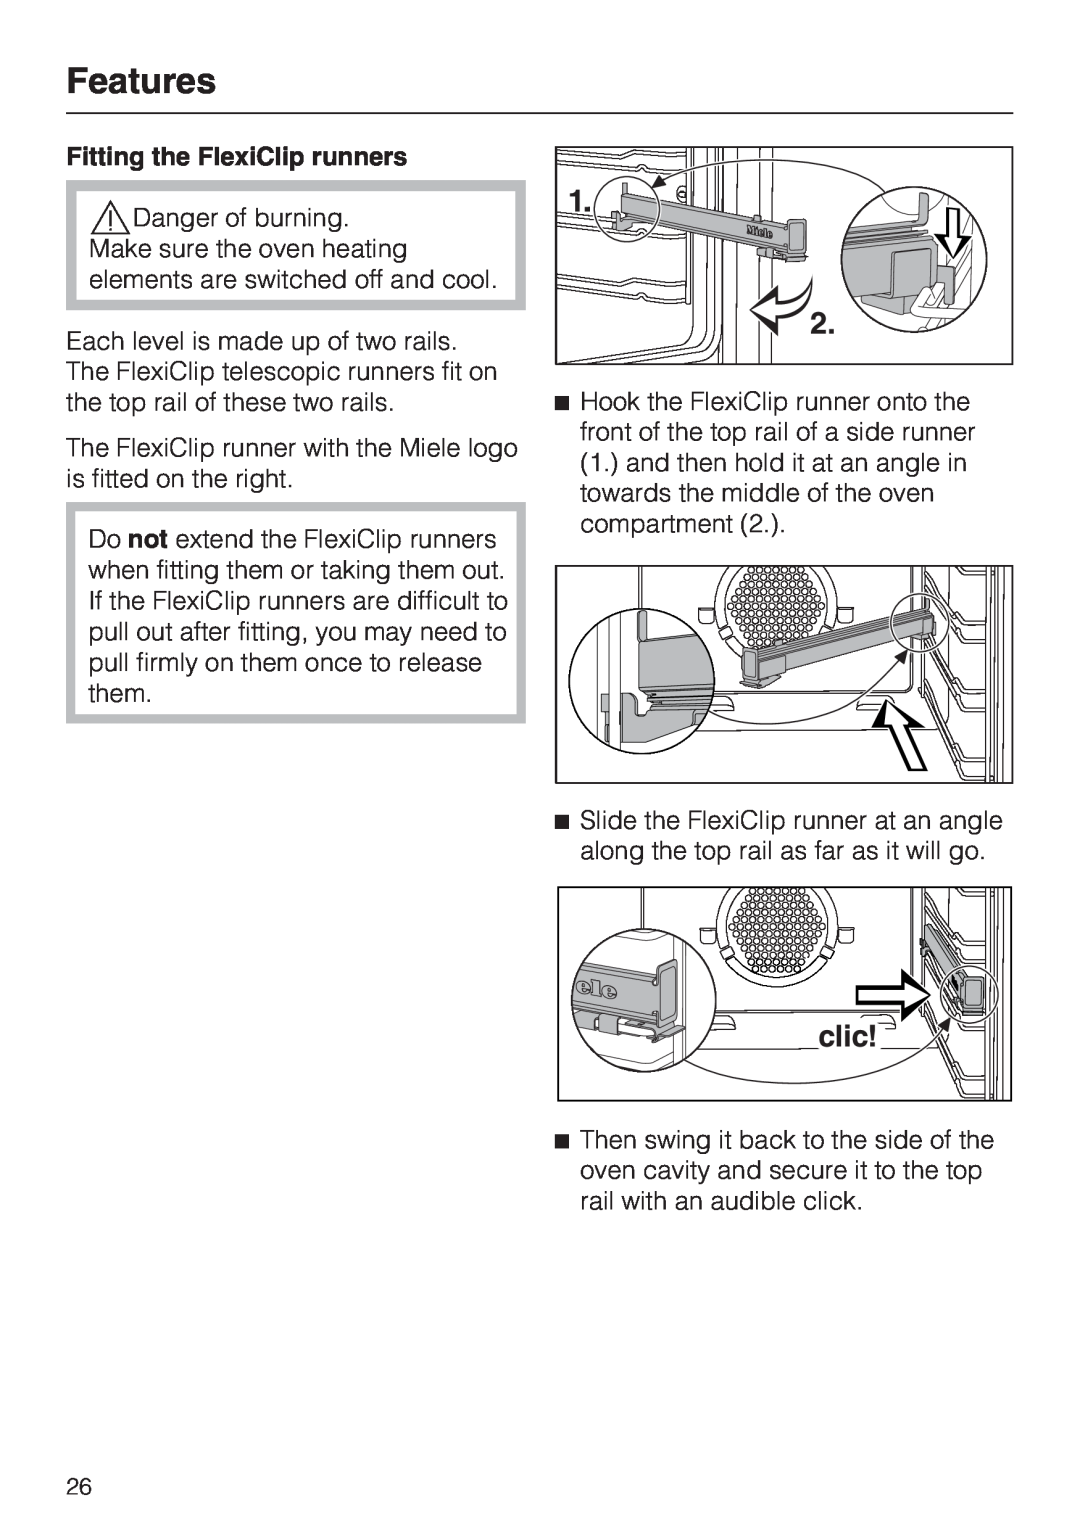 Miele 10 102 470 installation instructions Features, Fitting the FlexiClip runners 